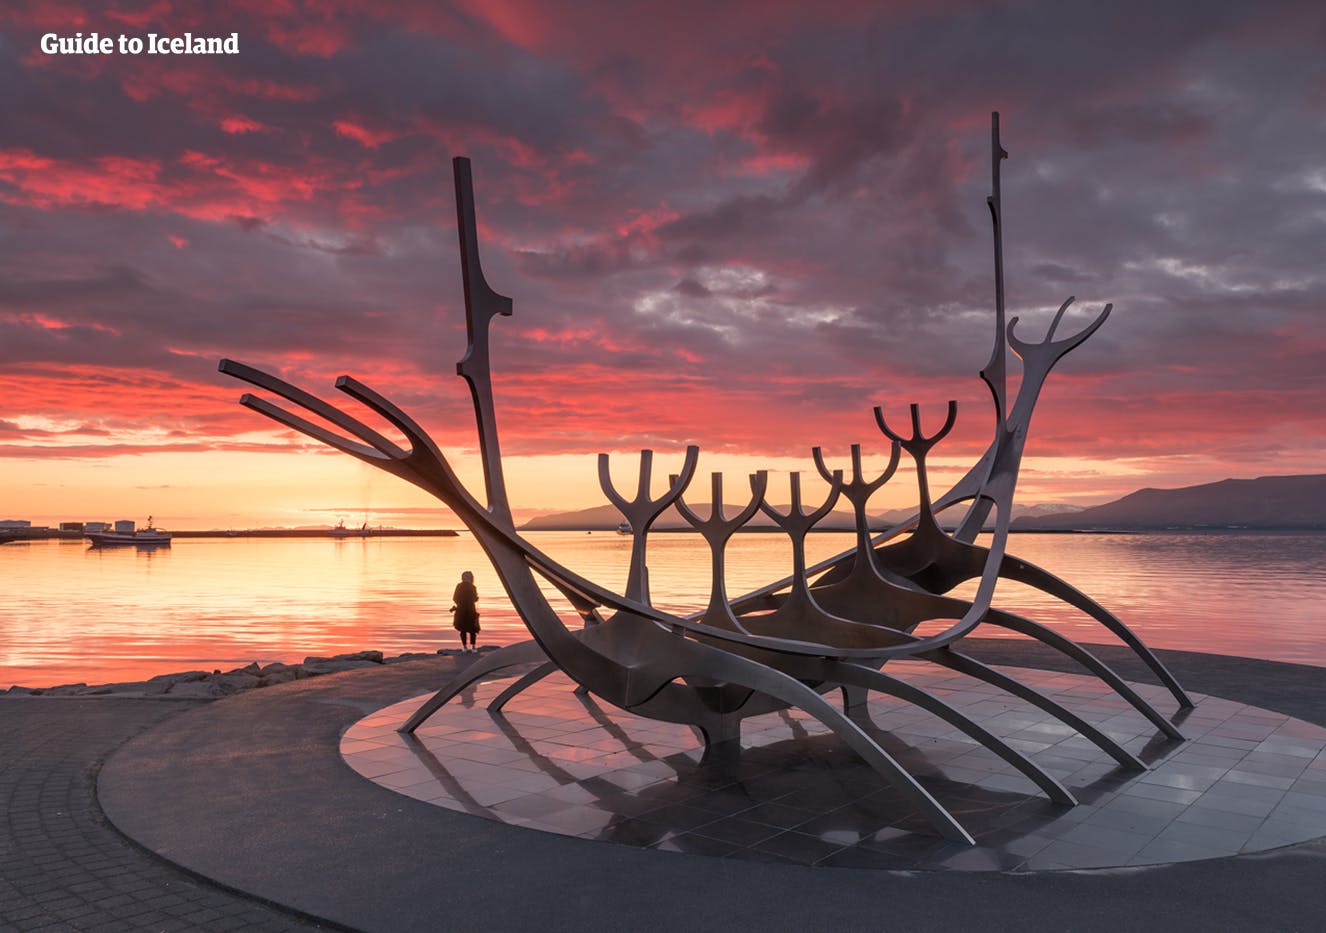 The Sun Voyager monument on the Reykjavik shore front.